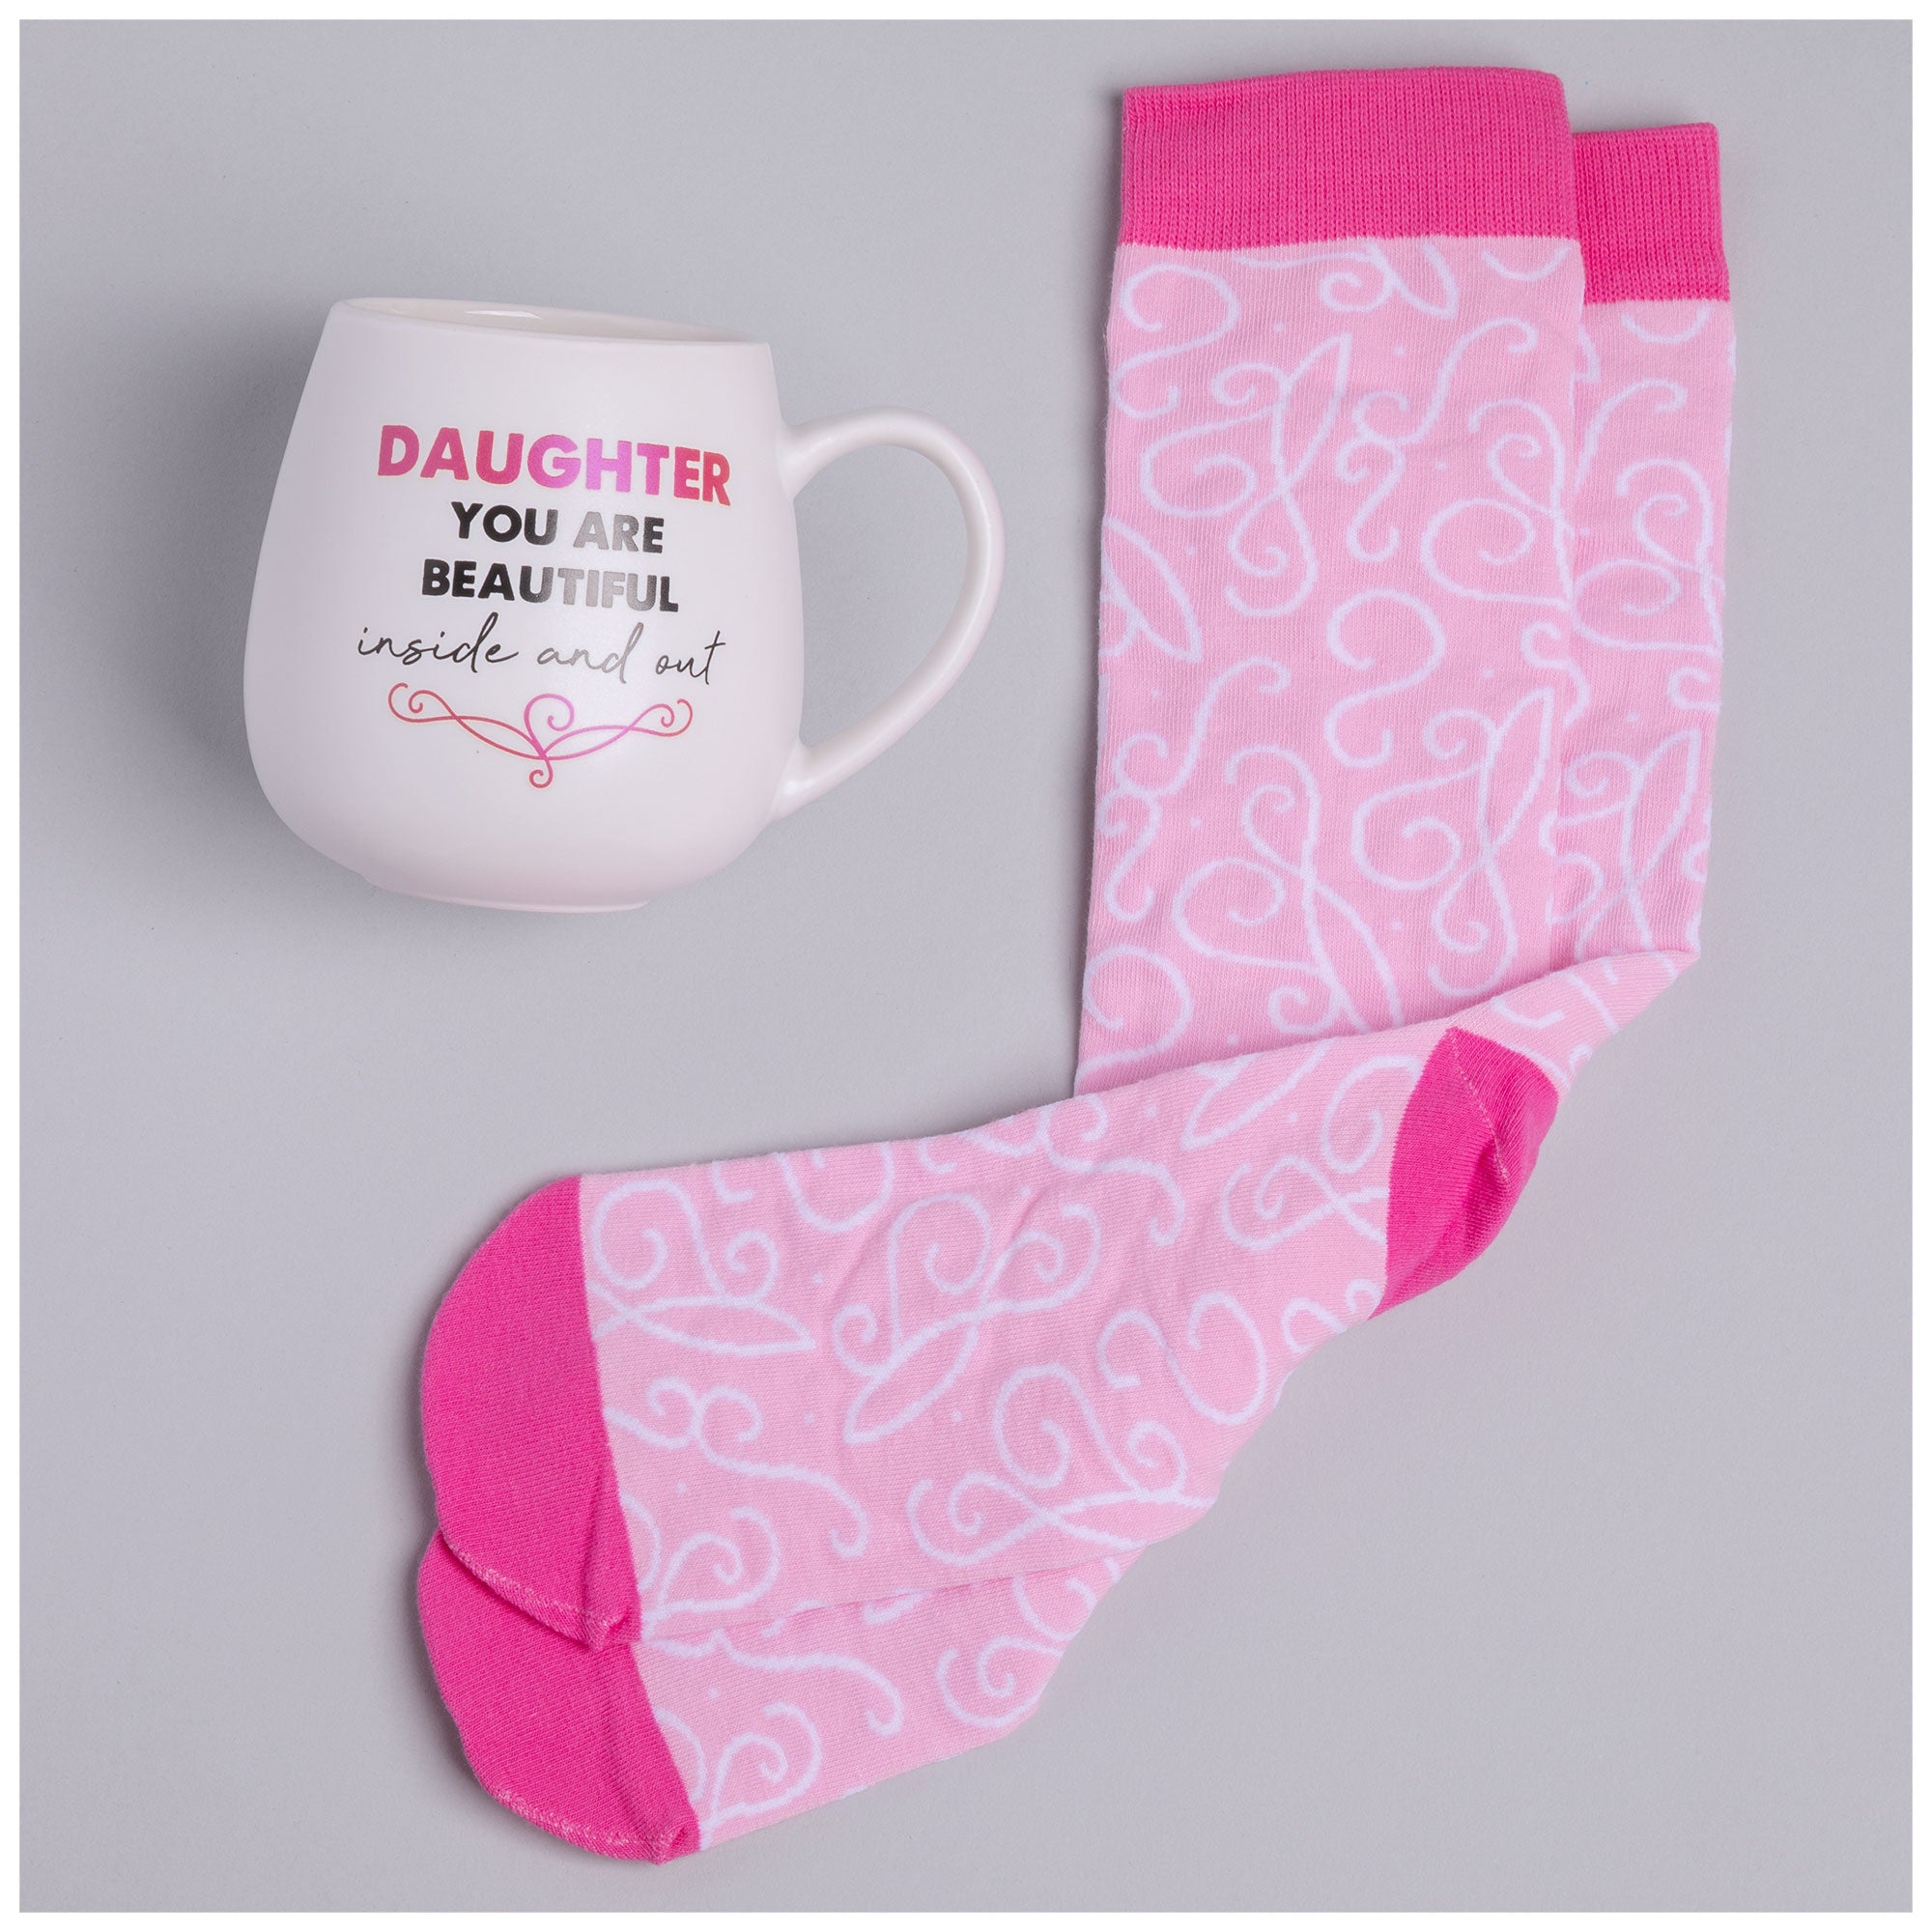 For The Perfect Person Mug & Sock Gift Set - Daughter